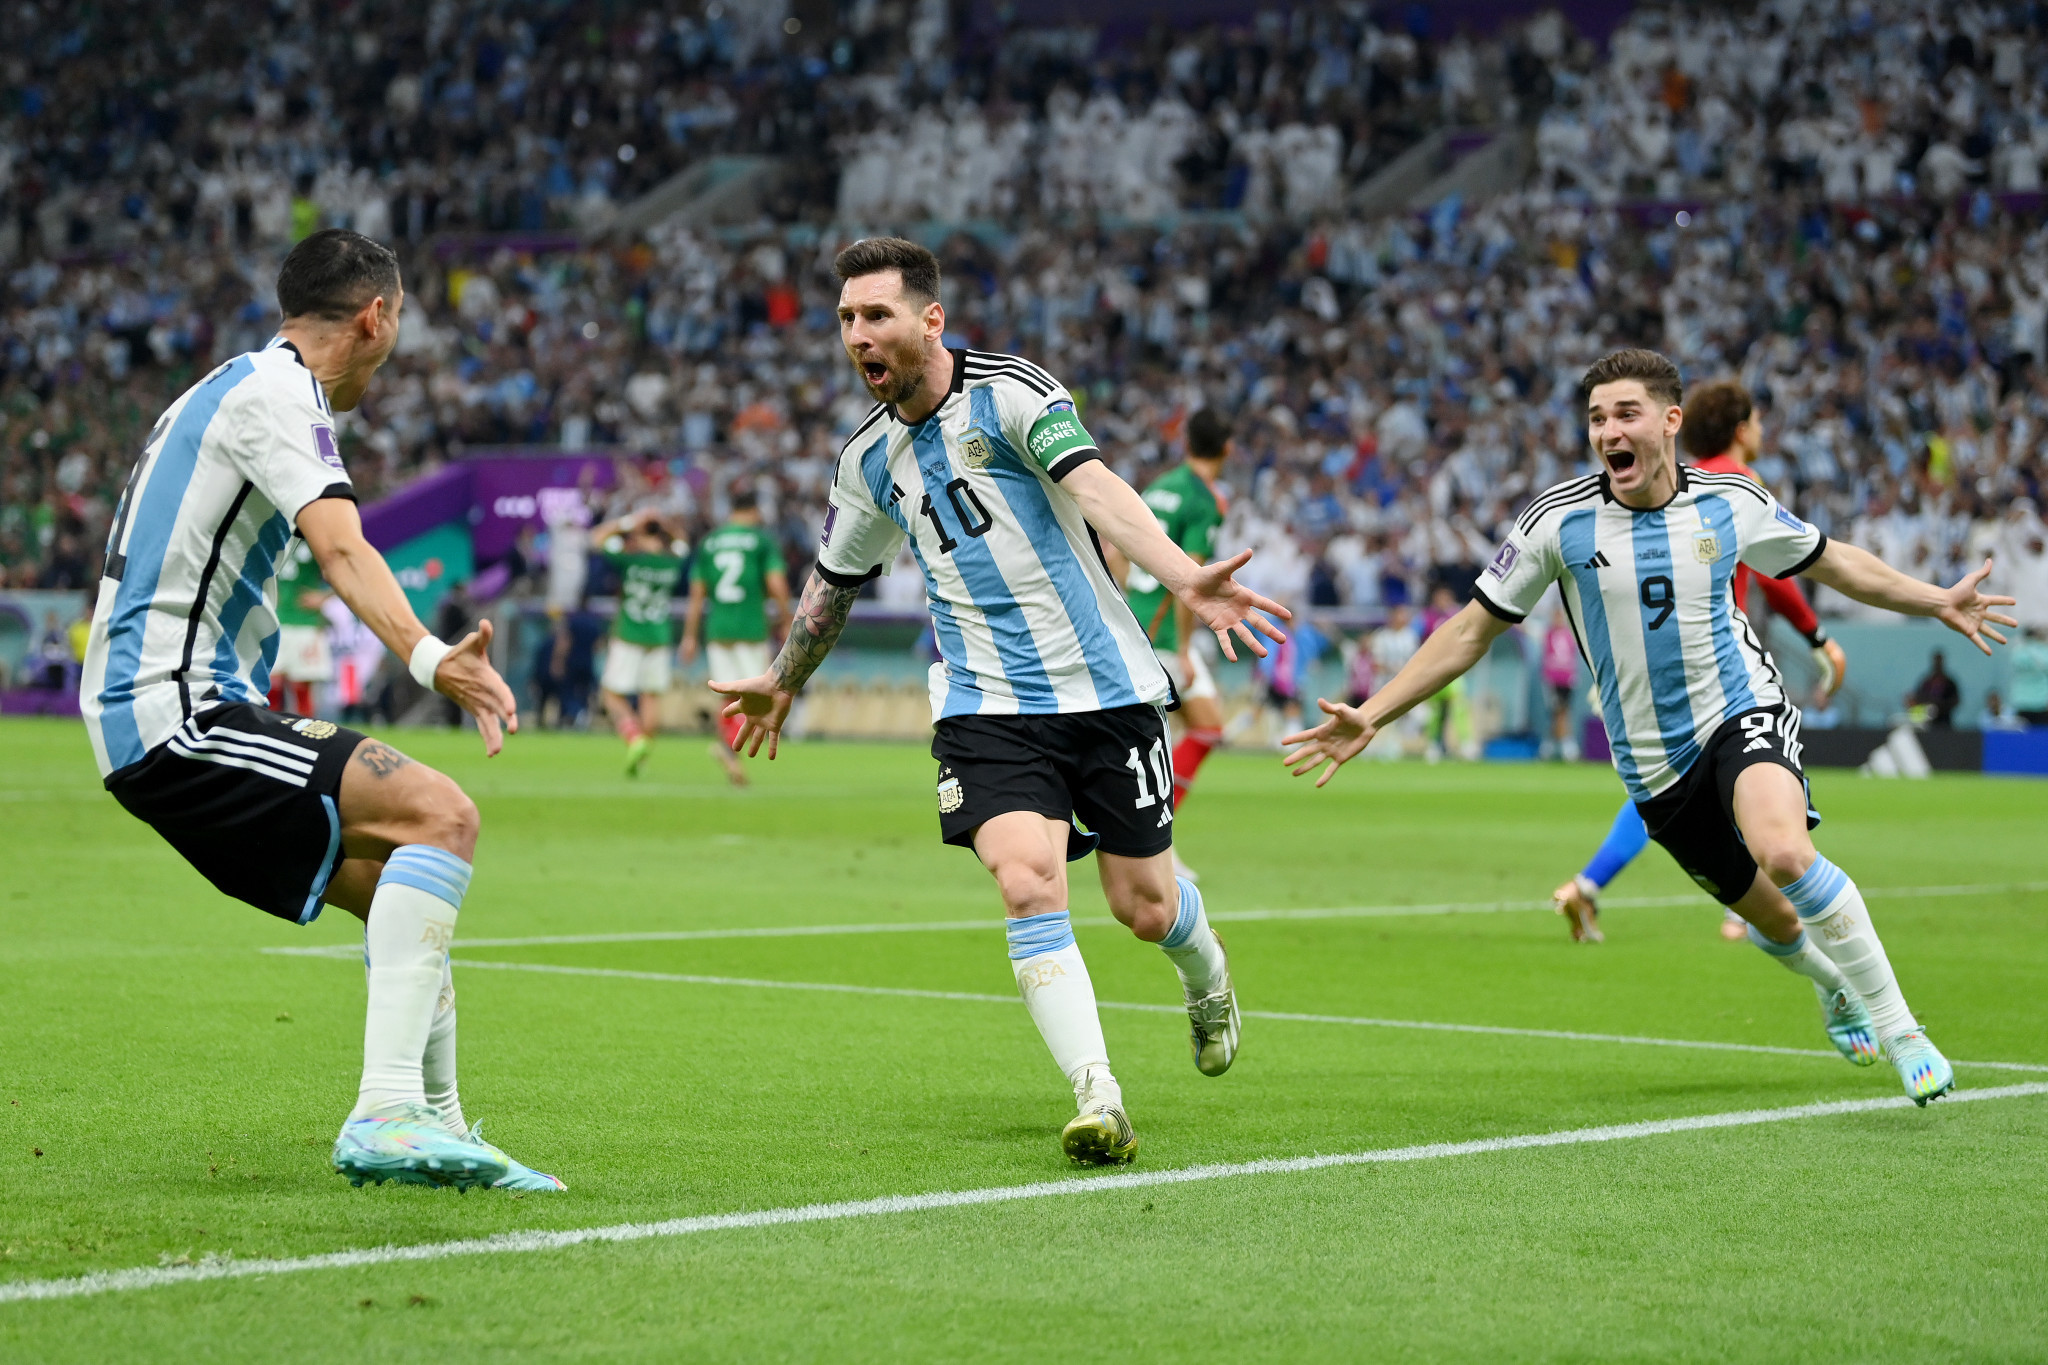 Lionel Messi, centre, produced a moment of magic as Argentina defeated Mexico 2-0 to keep their World Cup hopes alive ©Getty Images